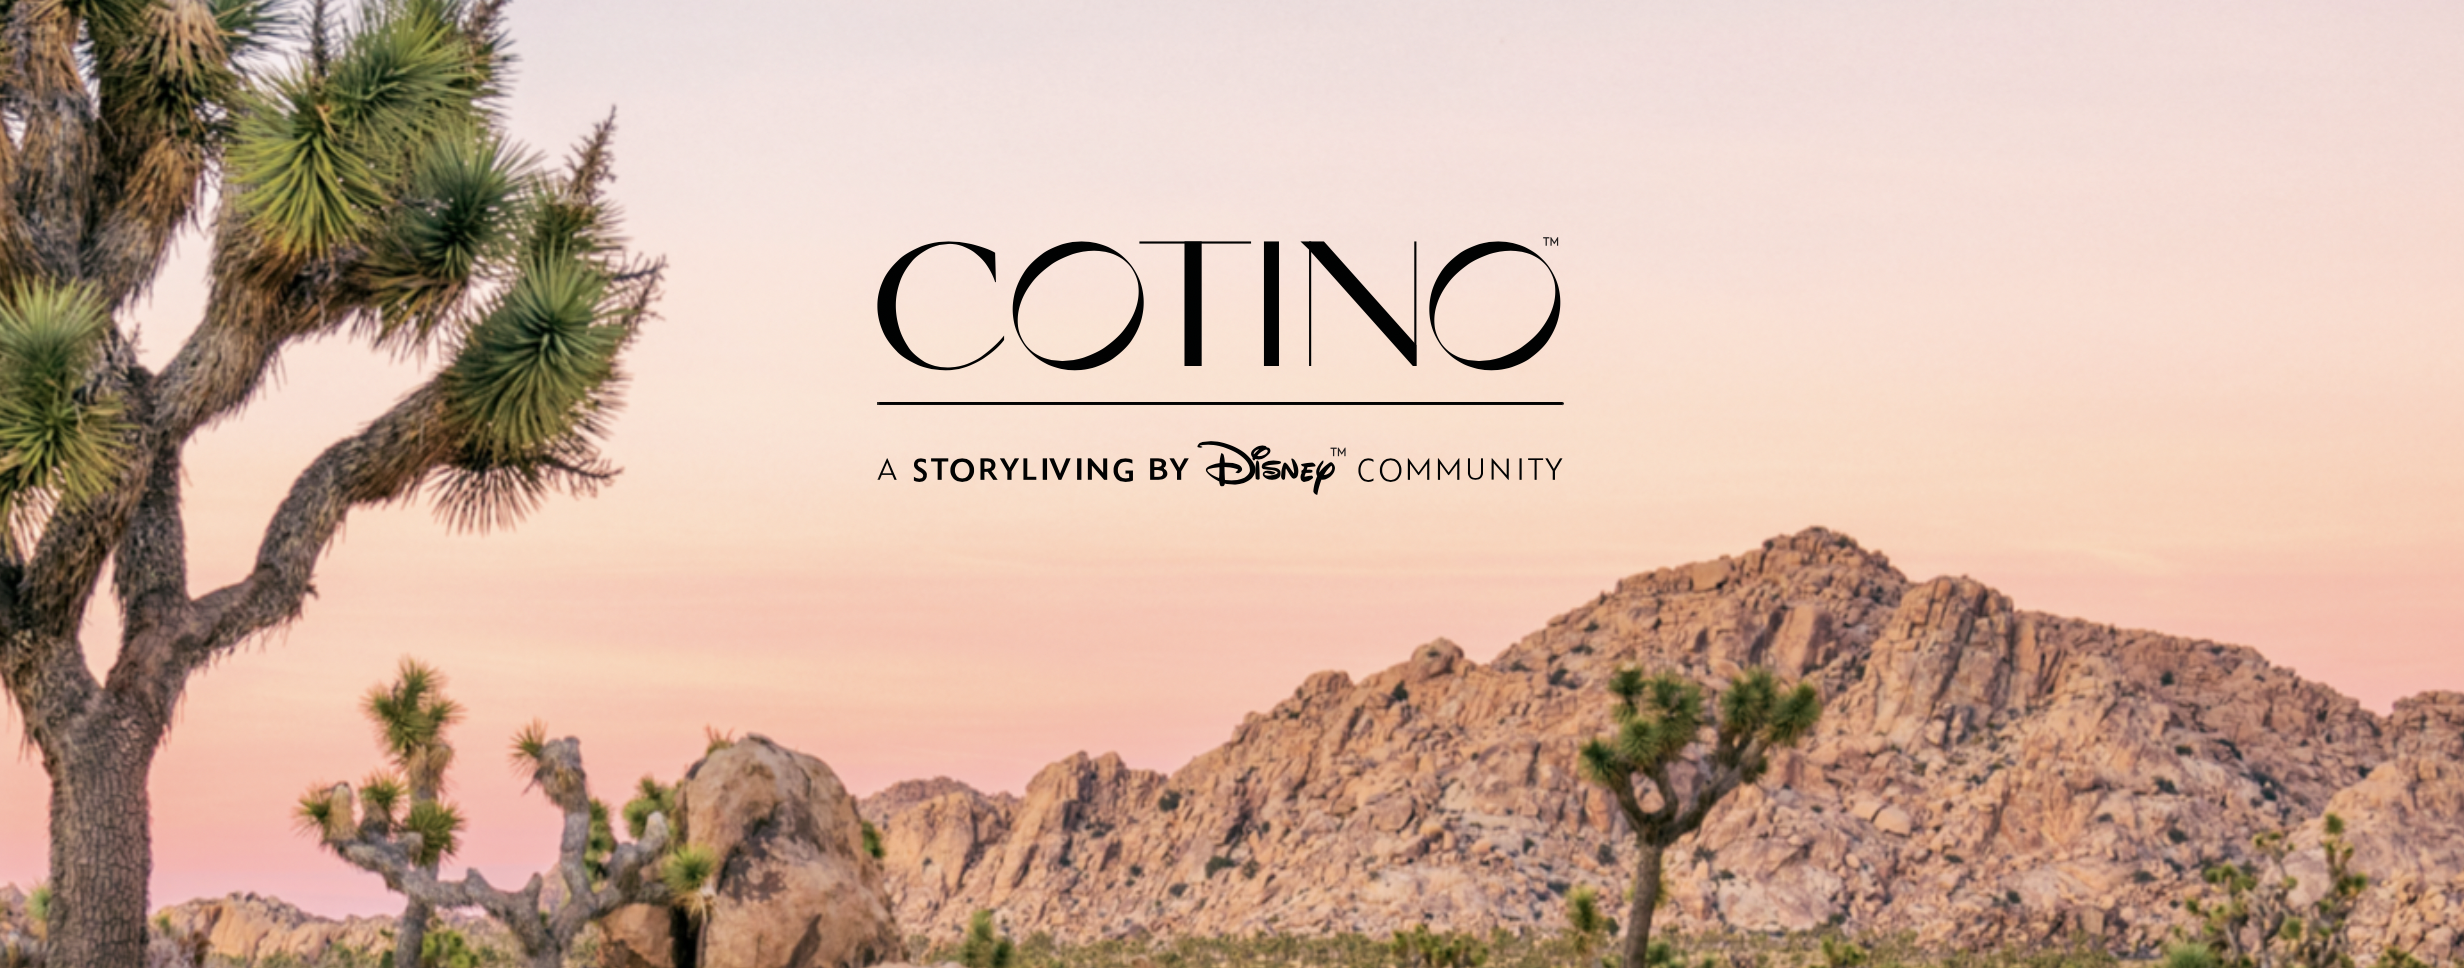 First-Ever Storyliving by Disney Community "Cotino" Aims to Create  Atmosphere Similar to Disney's BoardWalk in Town Center Concept